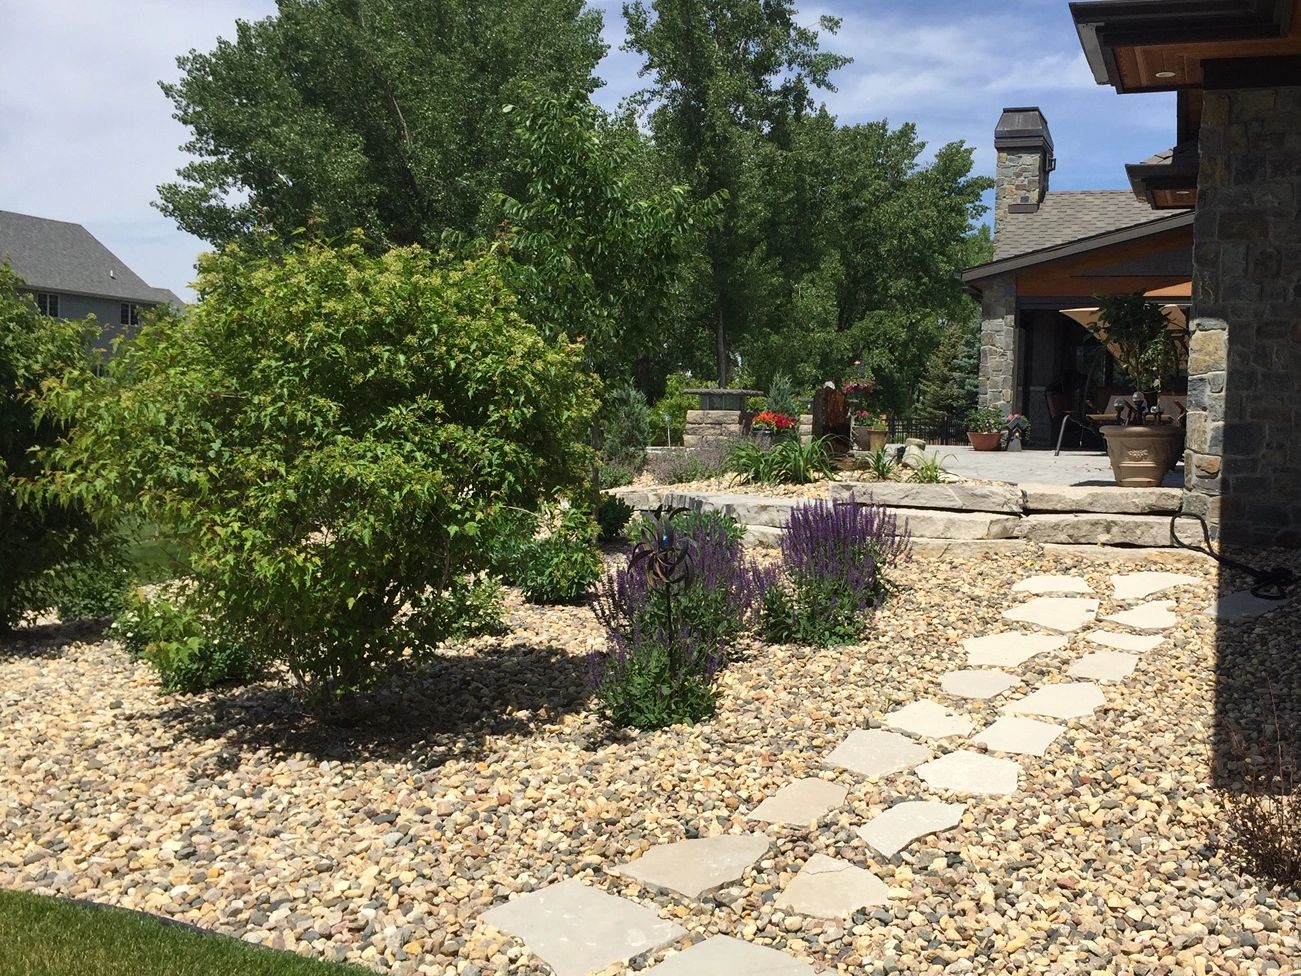 Expert Sioux Falls Landscaper Installs Stone Pathways, Perennial Shrubs, and Paver Patios